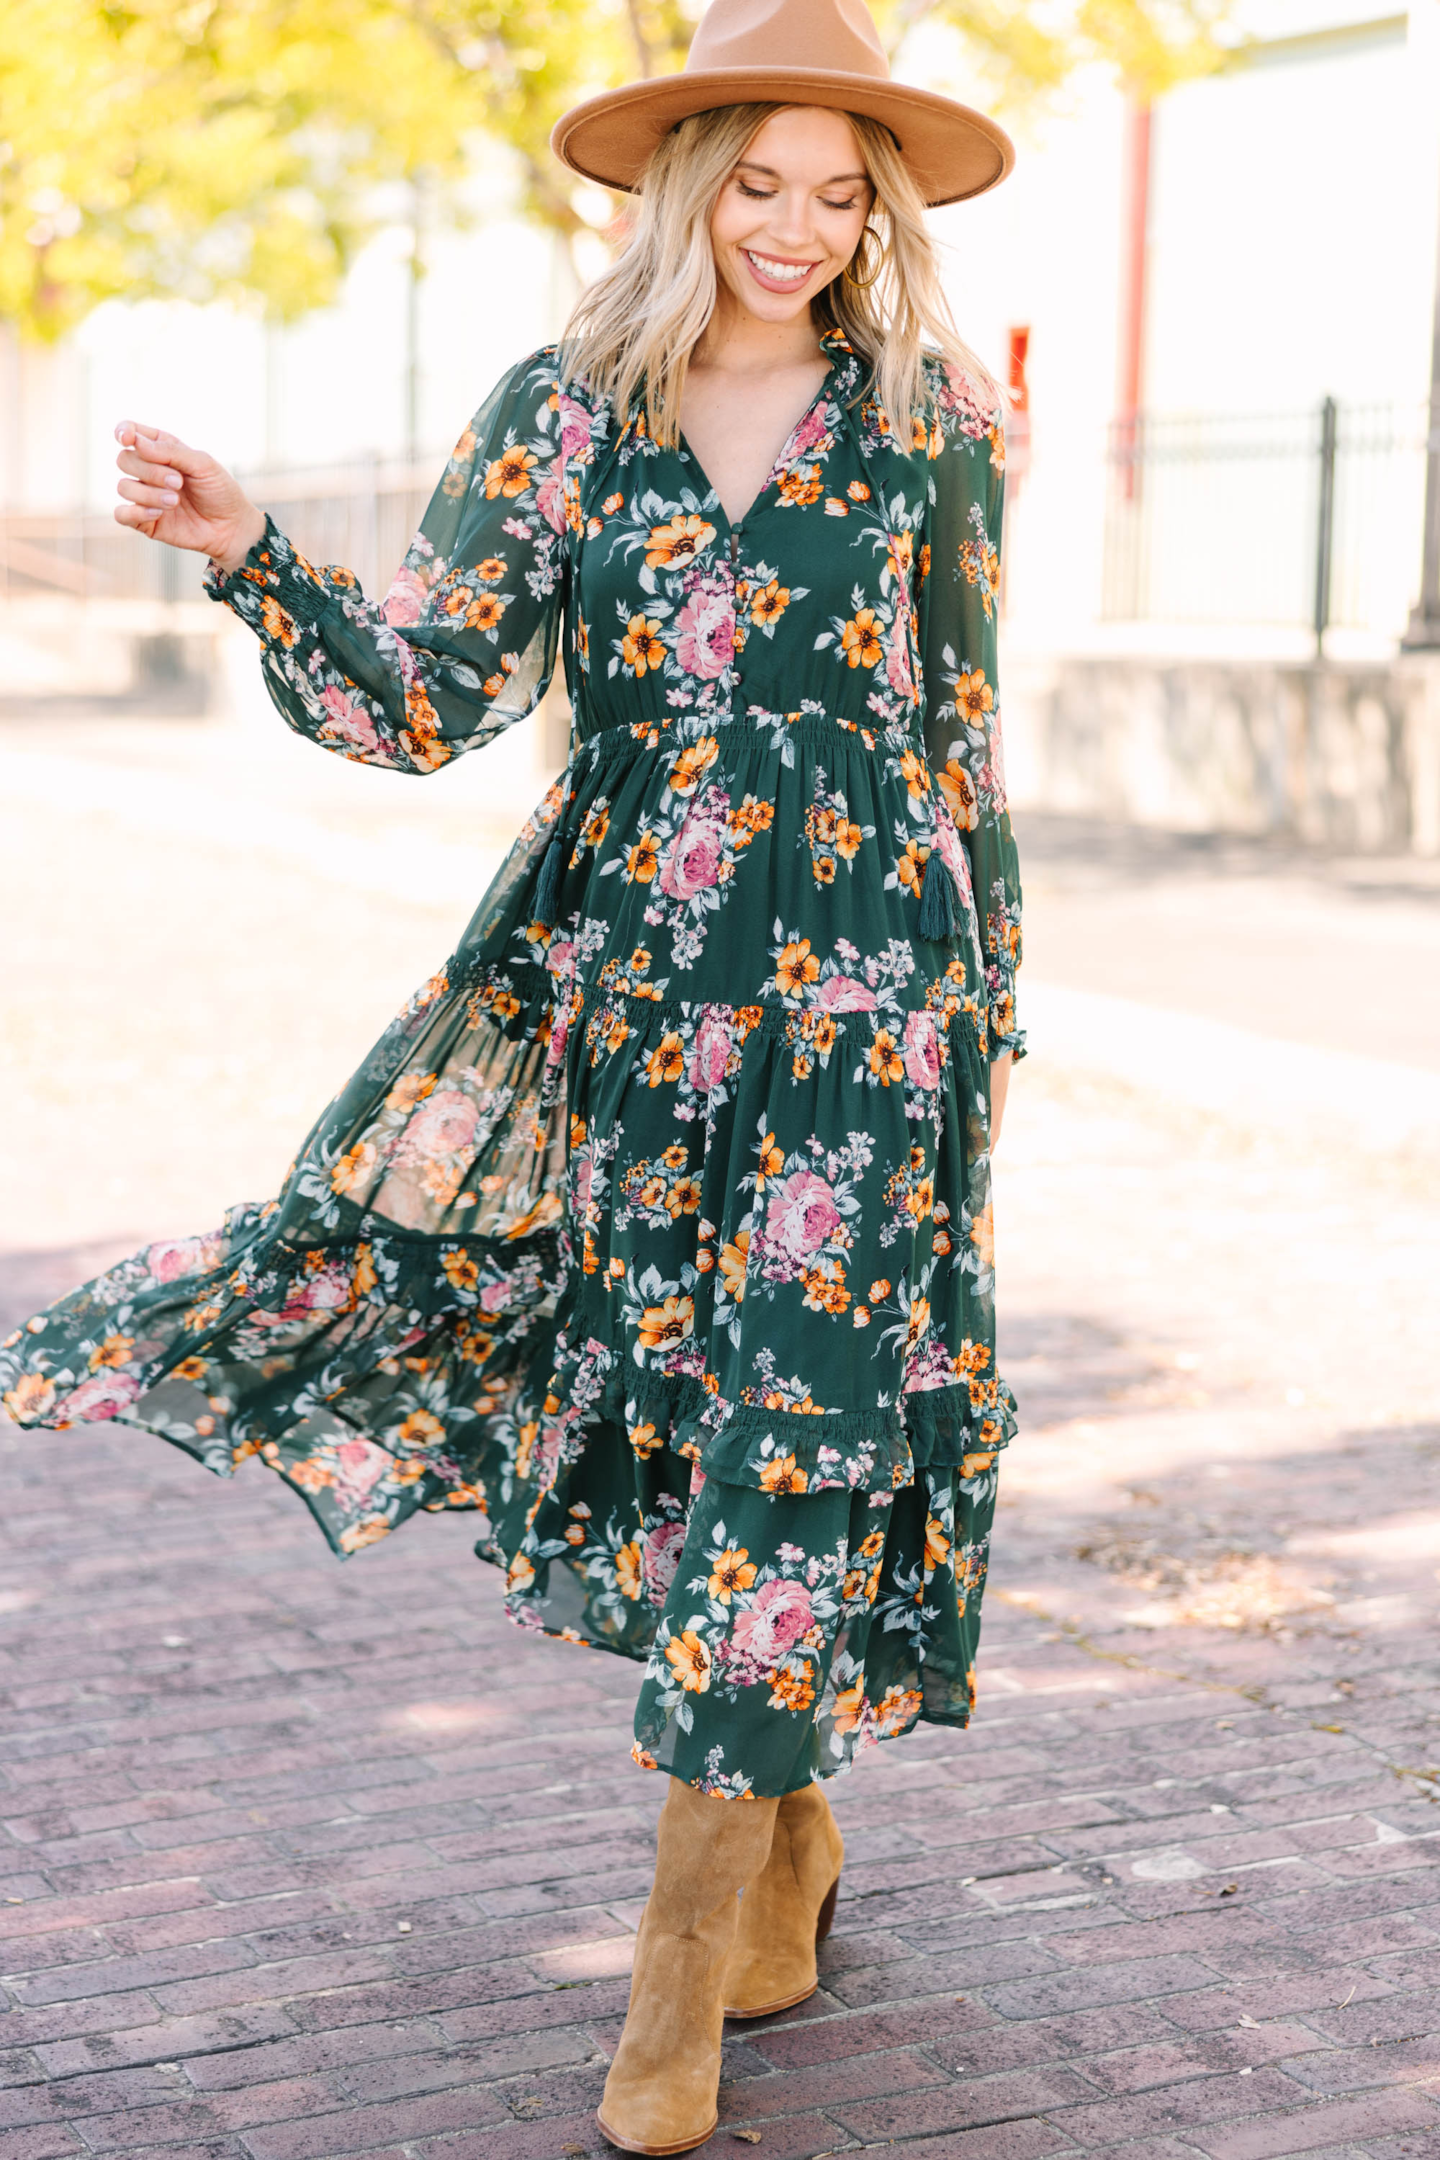 https://shopthemint.com/products/where-you-belong-green-floral-maxi-dress?variant=39713517109306